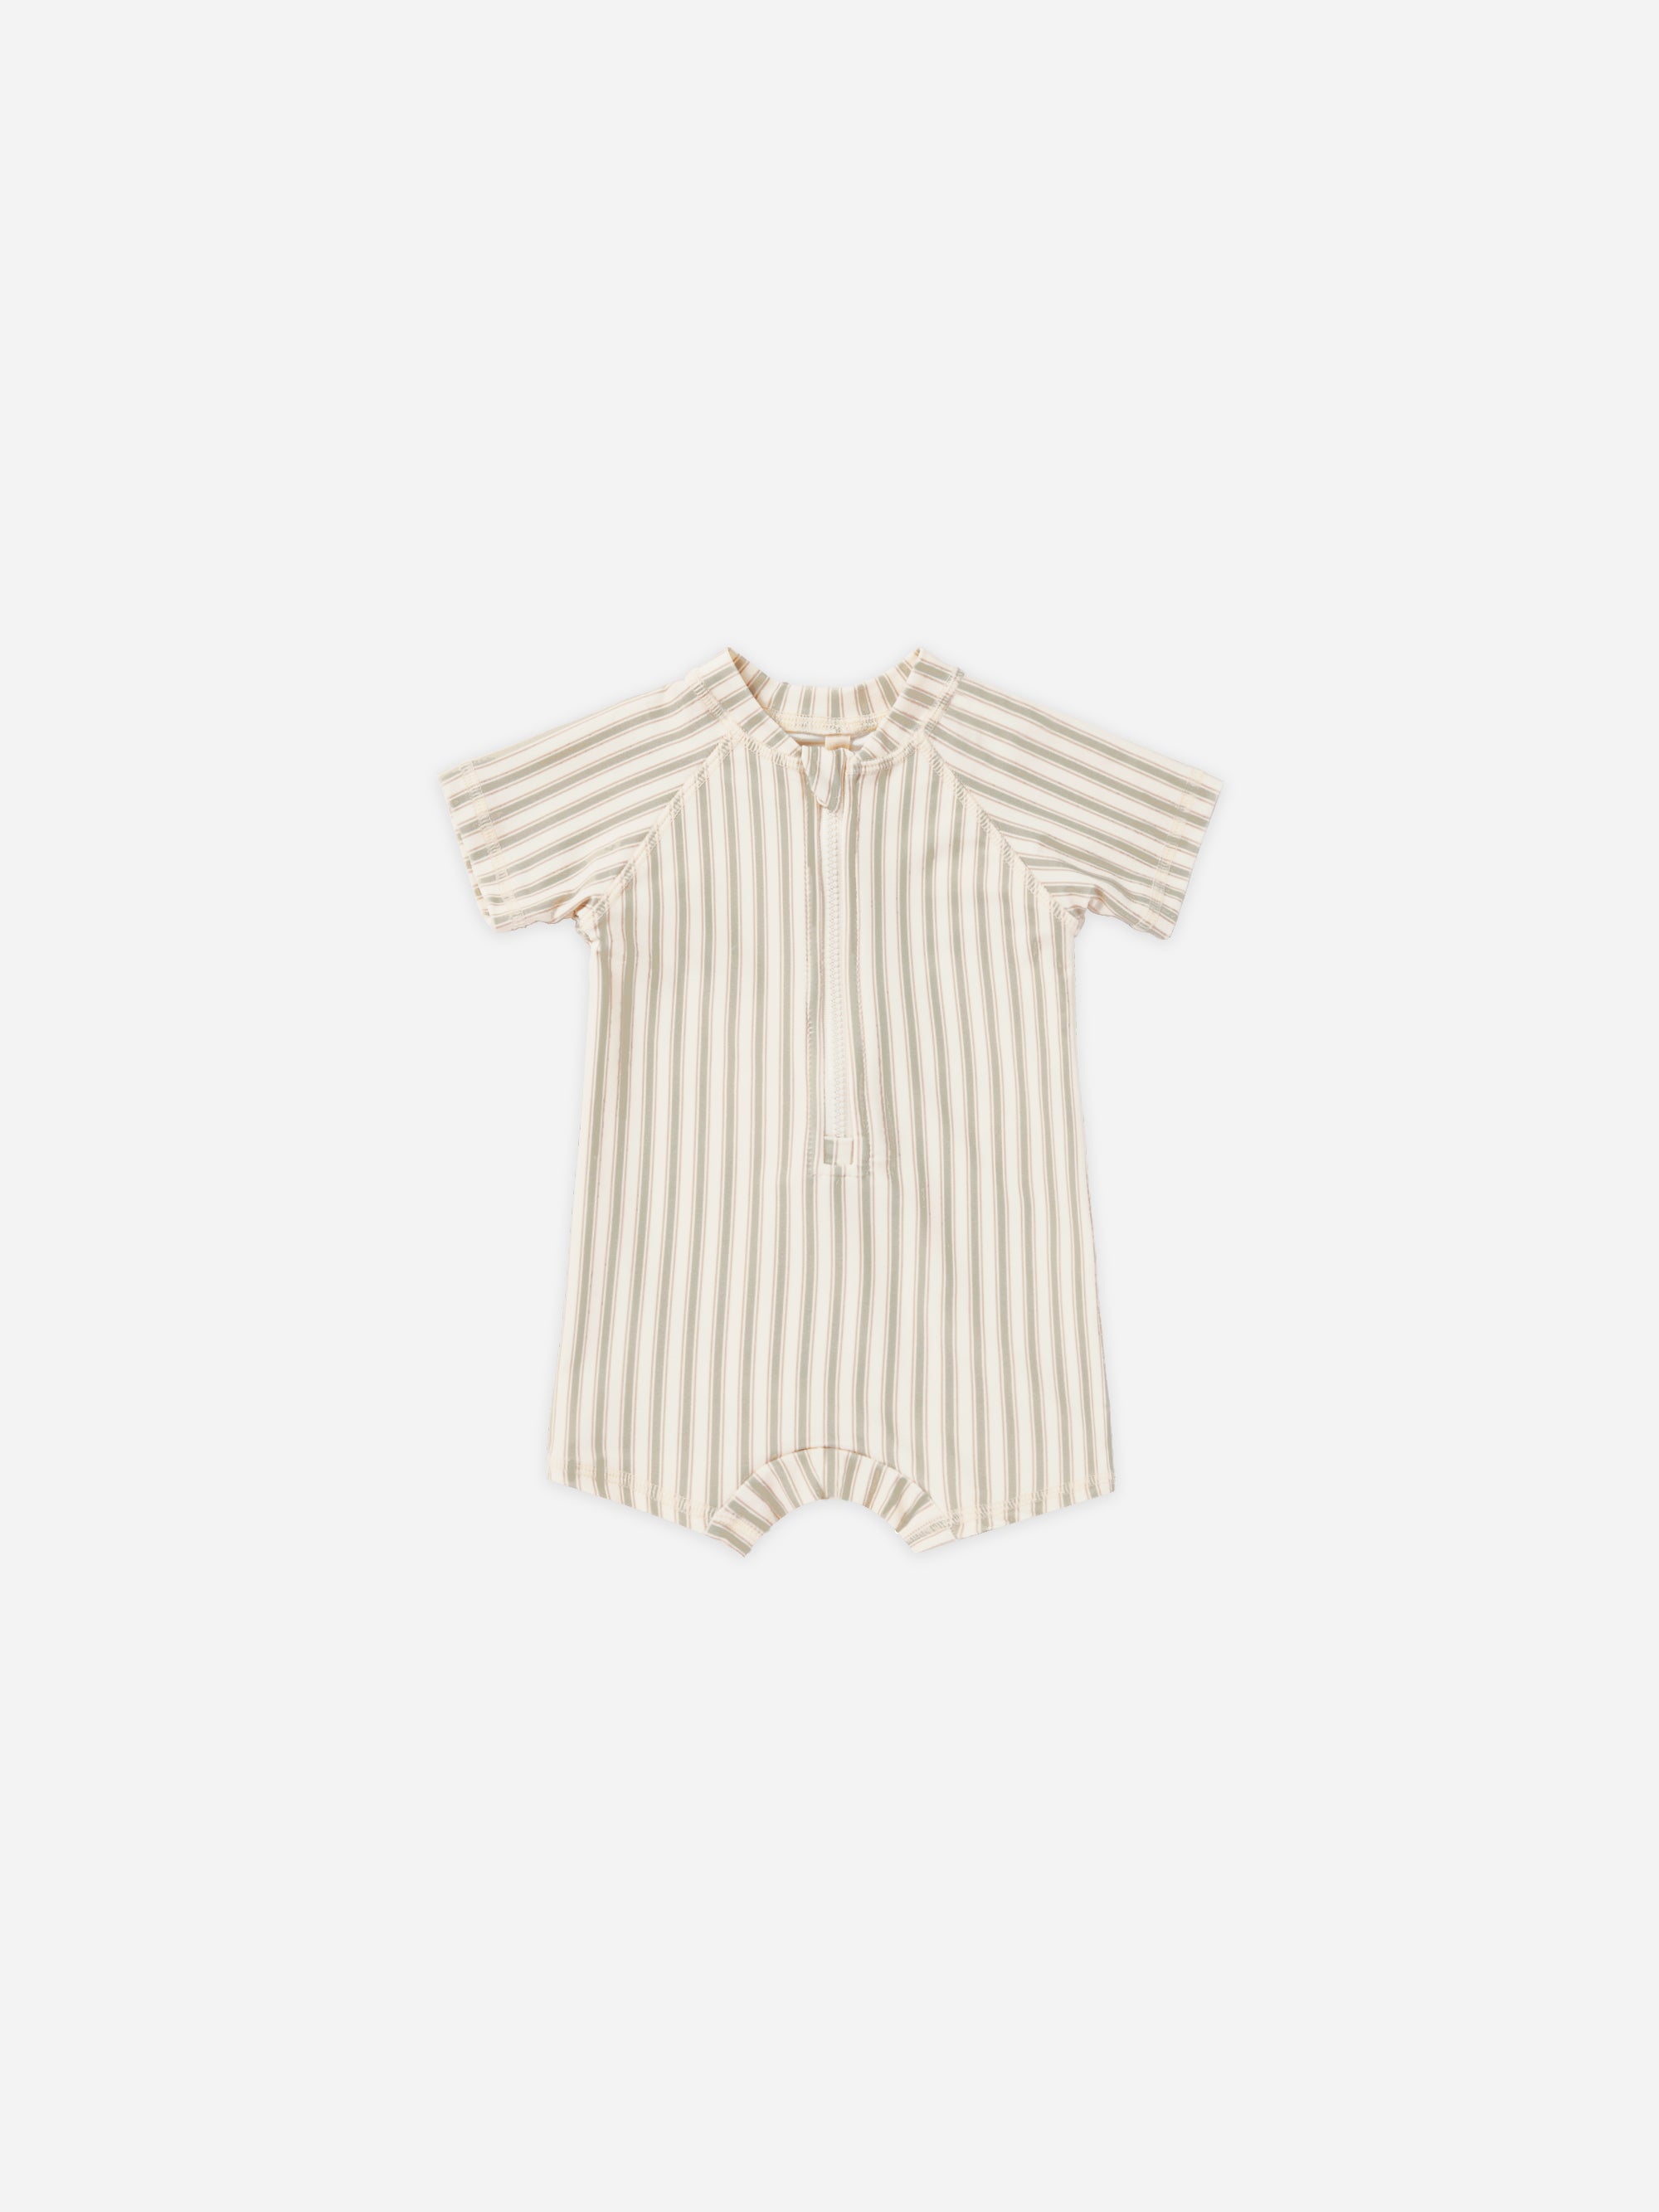 Zip Rashguard One-Piece || Vintage Stripe - Rylee + Cru | Kids Clothes | Trendy Baby Clothes | Modern Infant Outfits |